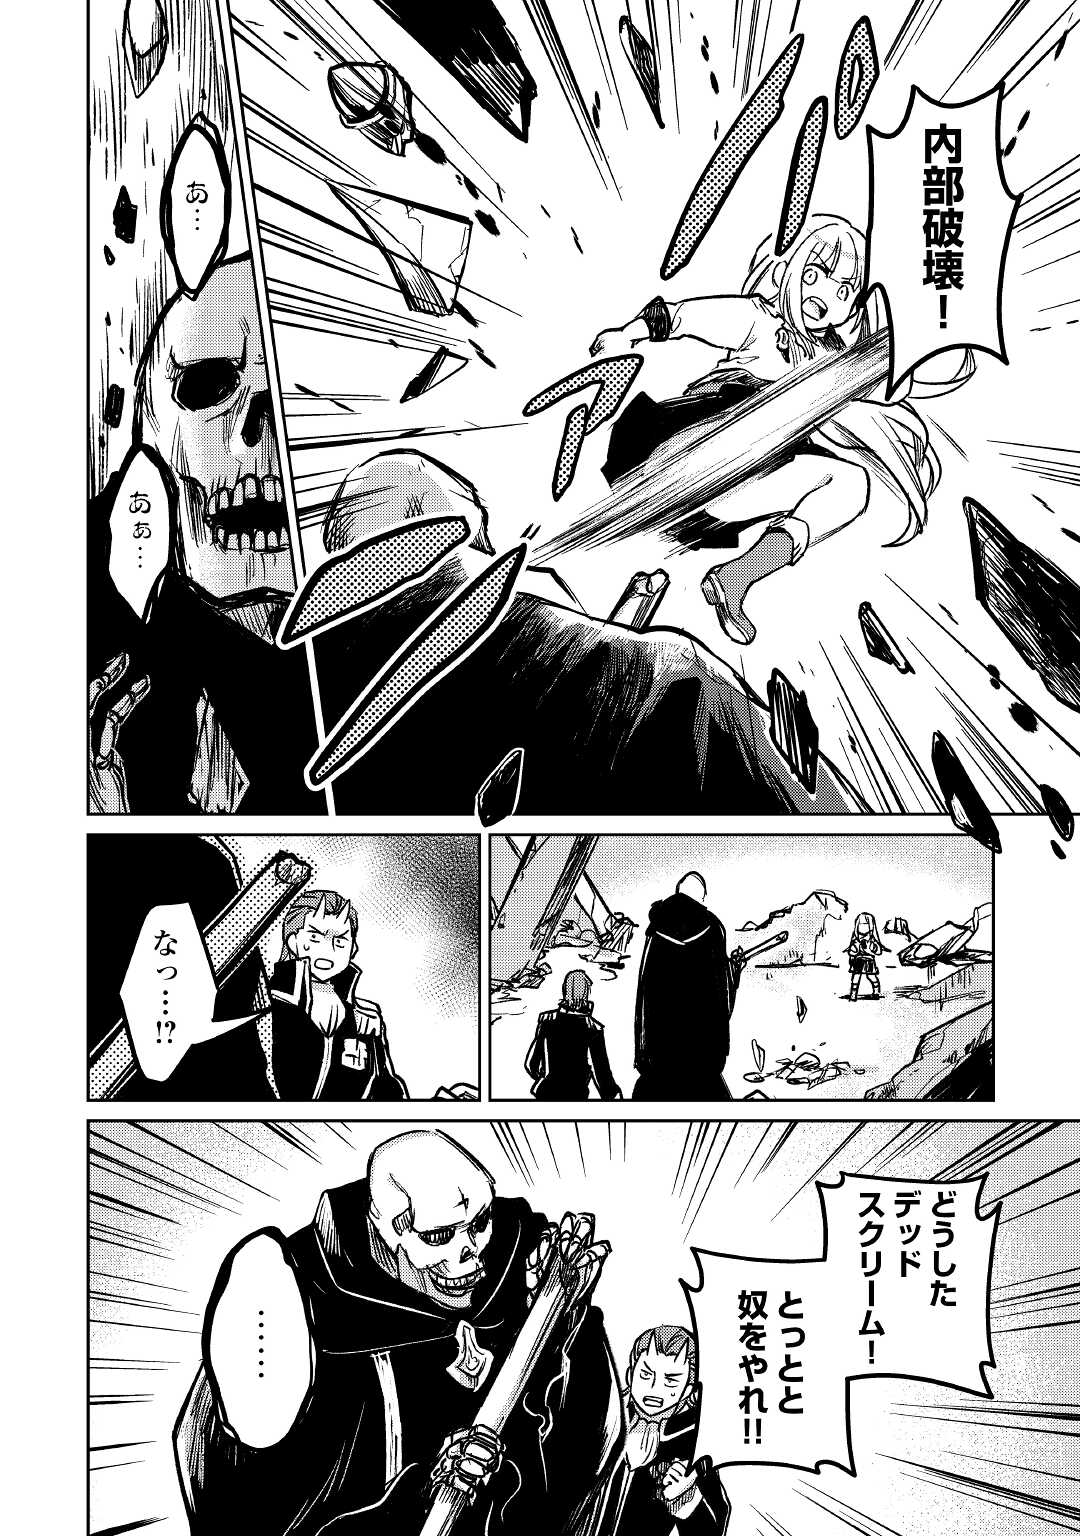 The Former Structural Researcher’s Story of Otherworldly Adventure 第39話 - Page 26